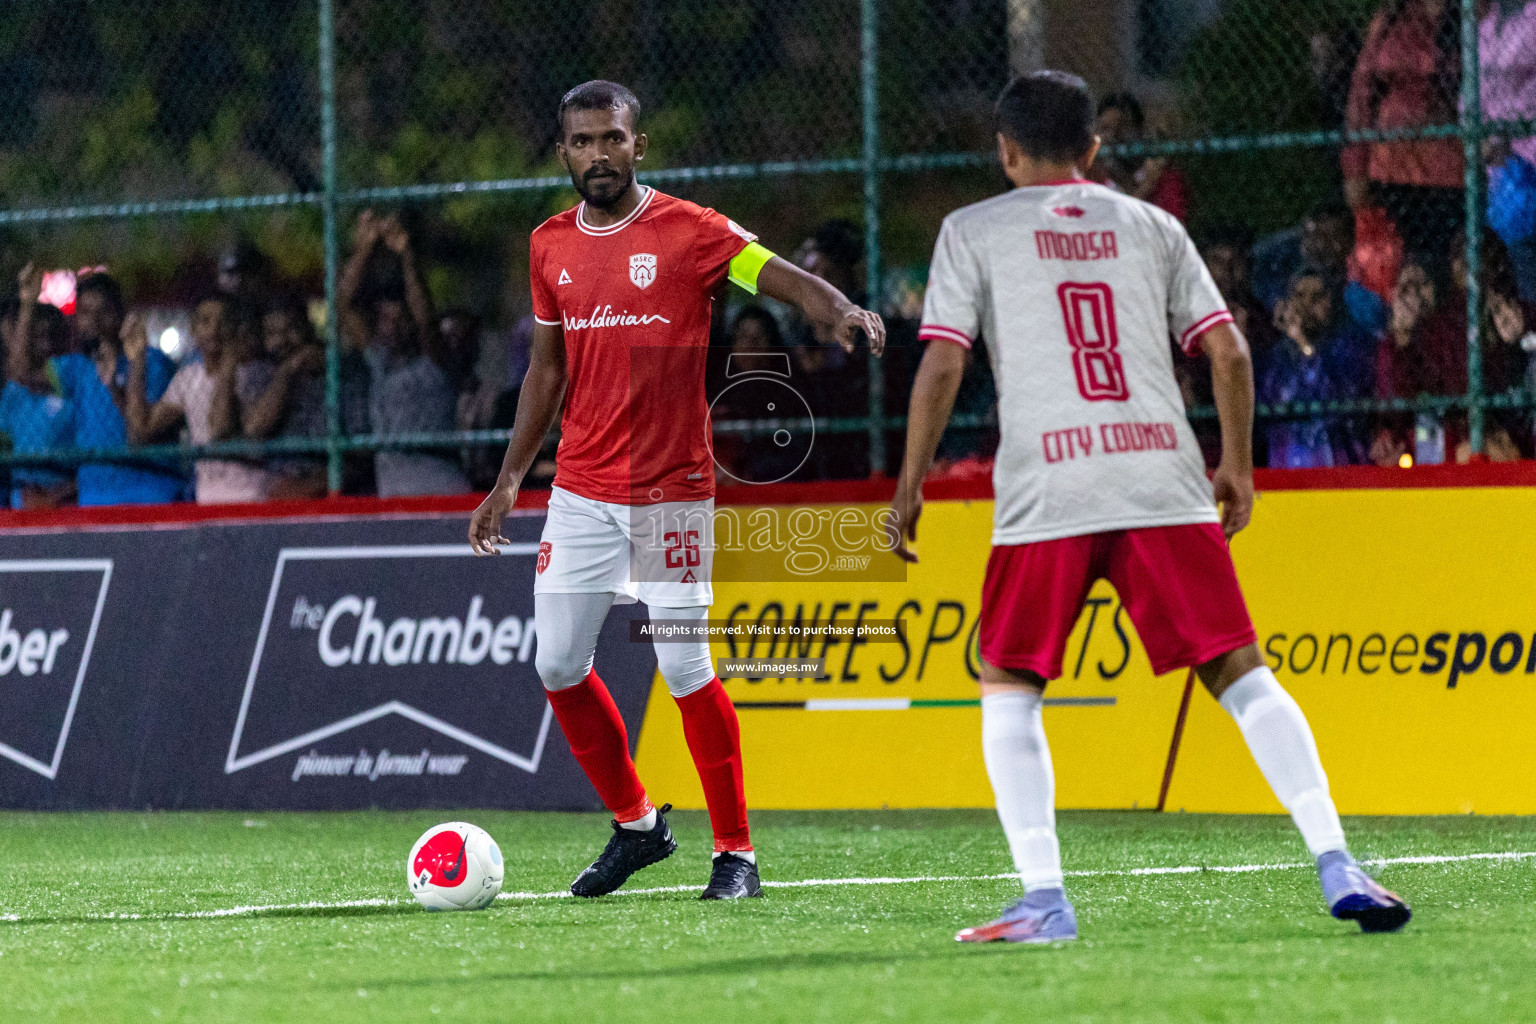 Team MCC vs Maldivian in Club Maldives Cup 2022 was held in Hulhumale', Maldives on Thursday, 13th October 2022. Photos: Ismail Thoriq/ images.mv